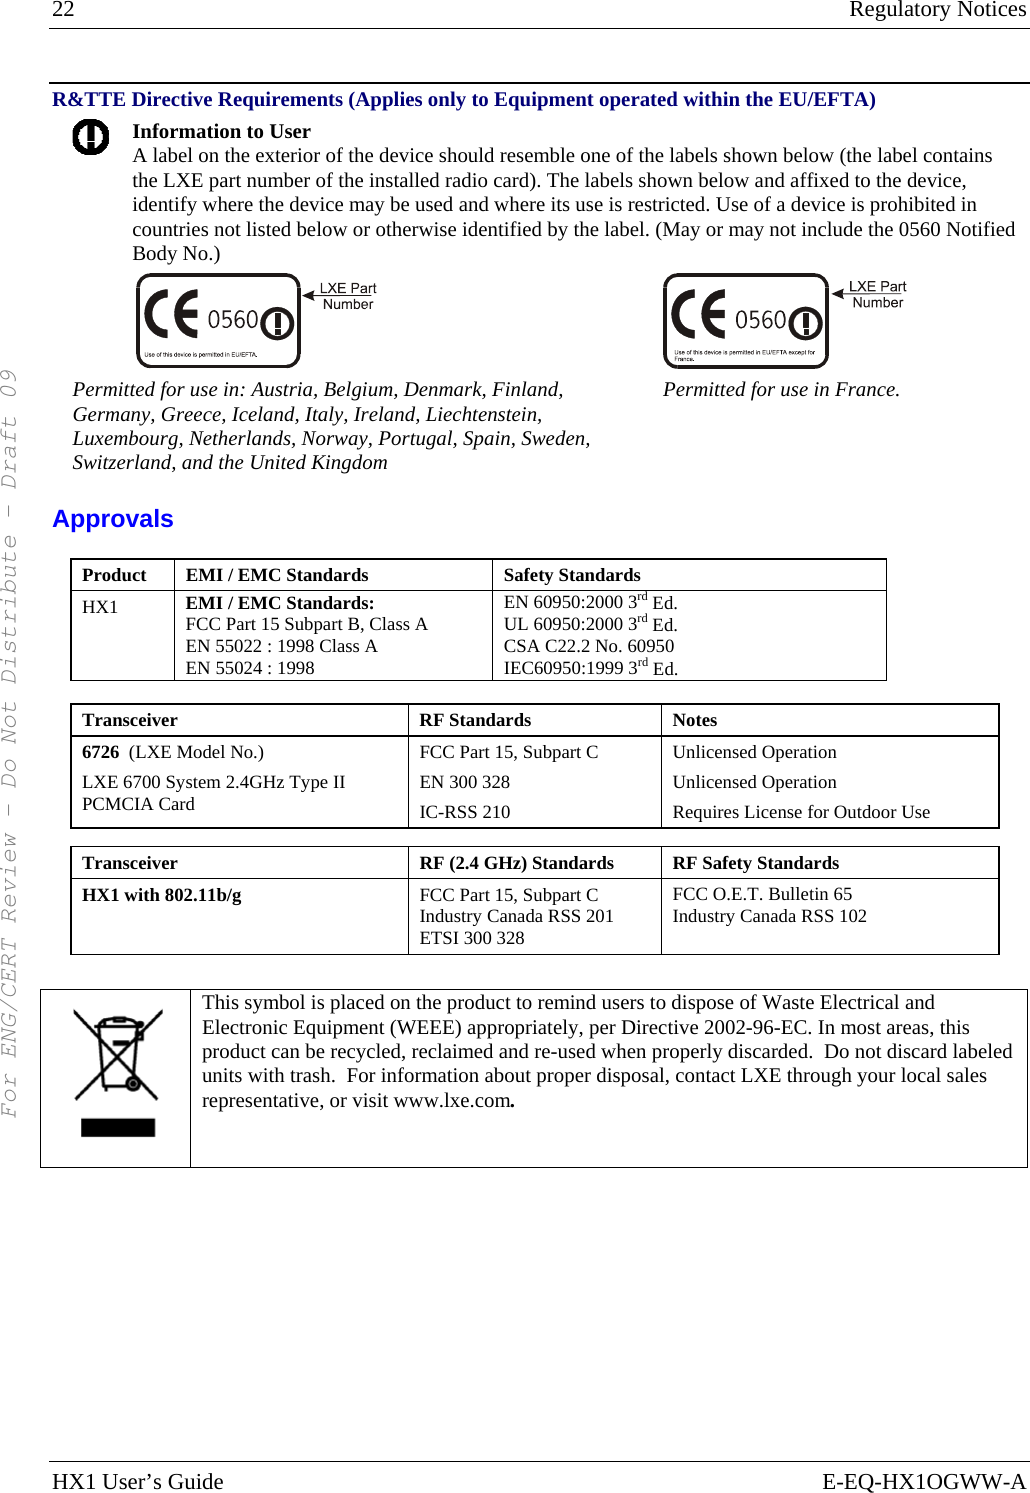 22  Regulatory Notices HX1 User’s Guide  E-EQ-HX1OGWW-A R&amp;TTE Directive Requirements (Applies only to Equipment operated within the EU/EFTA)  Information to User A label on the exterior of the device should resemble one of the labels shown below (the label contains the LXE part number of the installed radio card). The labels shown below and affixed to the device, identify where the device may be used and where its use is restricted. Use of a device is prohibited in countries not listed below or otherwise identified by the label. (May or may not include the 0560 Notified Body No.)   Permitted for use in: Austria, Belgium, Denmark, Finland, Germany, Greece, Iceland, Italy, Ireland, Liechtenstein, Luxembourg, Netherlands, Norway, Portugal, Spain, Sweden, Switzerland, and the United Kingdom Permitted for use in France. Approvals Product  EMI / EMC Standards  Safety Standards HX1  EMI / EMC Standards: FCC Part 15 Subpart B, Class A EN 55022 : 1998 Class A EN 55024 : 1998 EN 60950:2000 3rd Ed. UL 60950:2000 3rd Ed. CSA C22.2 No. 60950 IEC60950:1999 3rd Ed.  Transceiver RF Standards Notes 6726  (LXE Model No.) LXE 6700 System 2.4GHz Type II PCMCIA Card FCC Part 15, Subpart C EN 300 328 IC-RSS 210 Unlicensed Operation Unlicensed Operation Requires License for Outdoor Use  Transceiver  RF (2.4 GHz) Standards  RF Safety Standards HX1 with 802.11b/g  FCC Part 15, Subpart C Industry Canada RSS 201 ETSI 300 328 FCC O.E.T. Bulletin 65 Industry Canada RSS 102   This symbol is placed on the product to remind users to dispose of Waste Electrical and Electronic Equipment (WEEE) appropriately, per Directive 2002-96-EC. In most areas, this product can be recycled, reclaimed and re-used when properly discarded.  Do not discard labeled units with trash.  For information about proper disposal, contact LXE through your local sales representative, or visit www.lxe.com. For ENG/CERT Review - Do Not Distribute - Draft 09